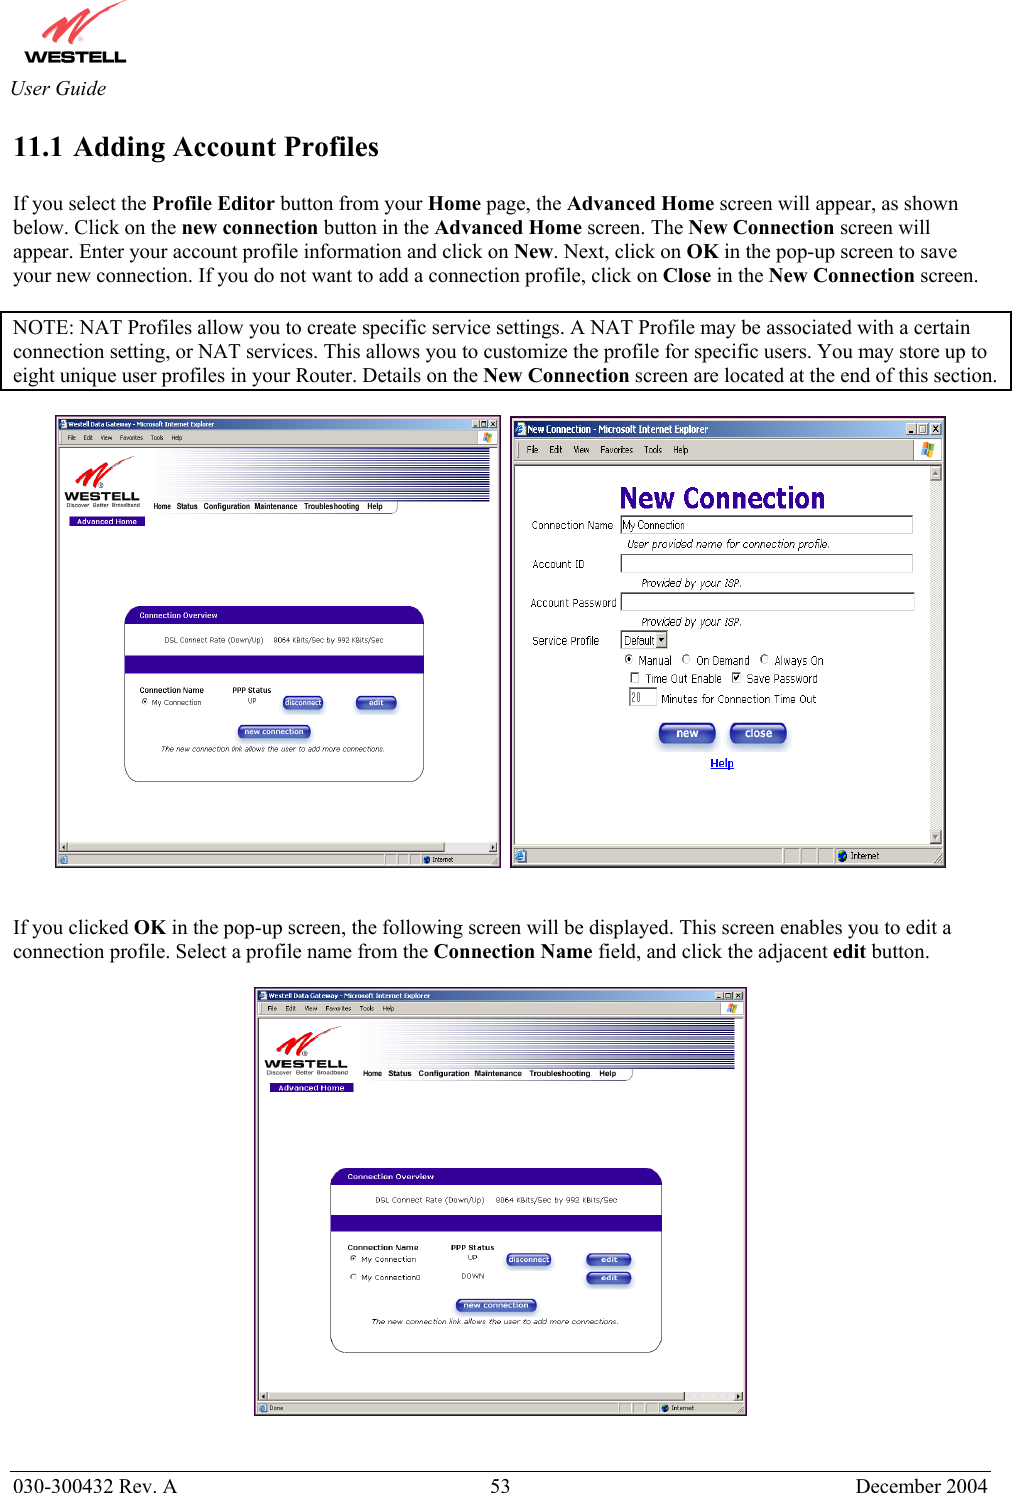       030-300432 Rev. A  53 December 2004  User Guide 11.1 Adding Account Profiles  If you select the Profile Editor button from your Home page, the Advanced Home screen will appear, as shown below. Click on the new connection button in the Advanced Home screen. The New Connection screen will appear. Enter your account profile information and click on New. Next, click on OK in the pop-up screen to save your new connection. If you do not want to add a connection profile, click on Close in the New Connection screen.   NOTE: NAT Profiles allow you to create specific service settings. A NAT Profile may be associated with a certain connection setting, or NAT services. This allows you to customize the profile for specific users. You may store up to eight unique user profiles in your Router. Details on the New Connection screen are located at the end of this section.        If you clicked OK in the pop-up screen, the following screen will be displayed. This screen enables you to edit a connection profile. Select a profile name from the Connection Name field, and click the adjacent edit button.     